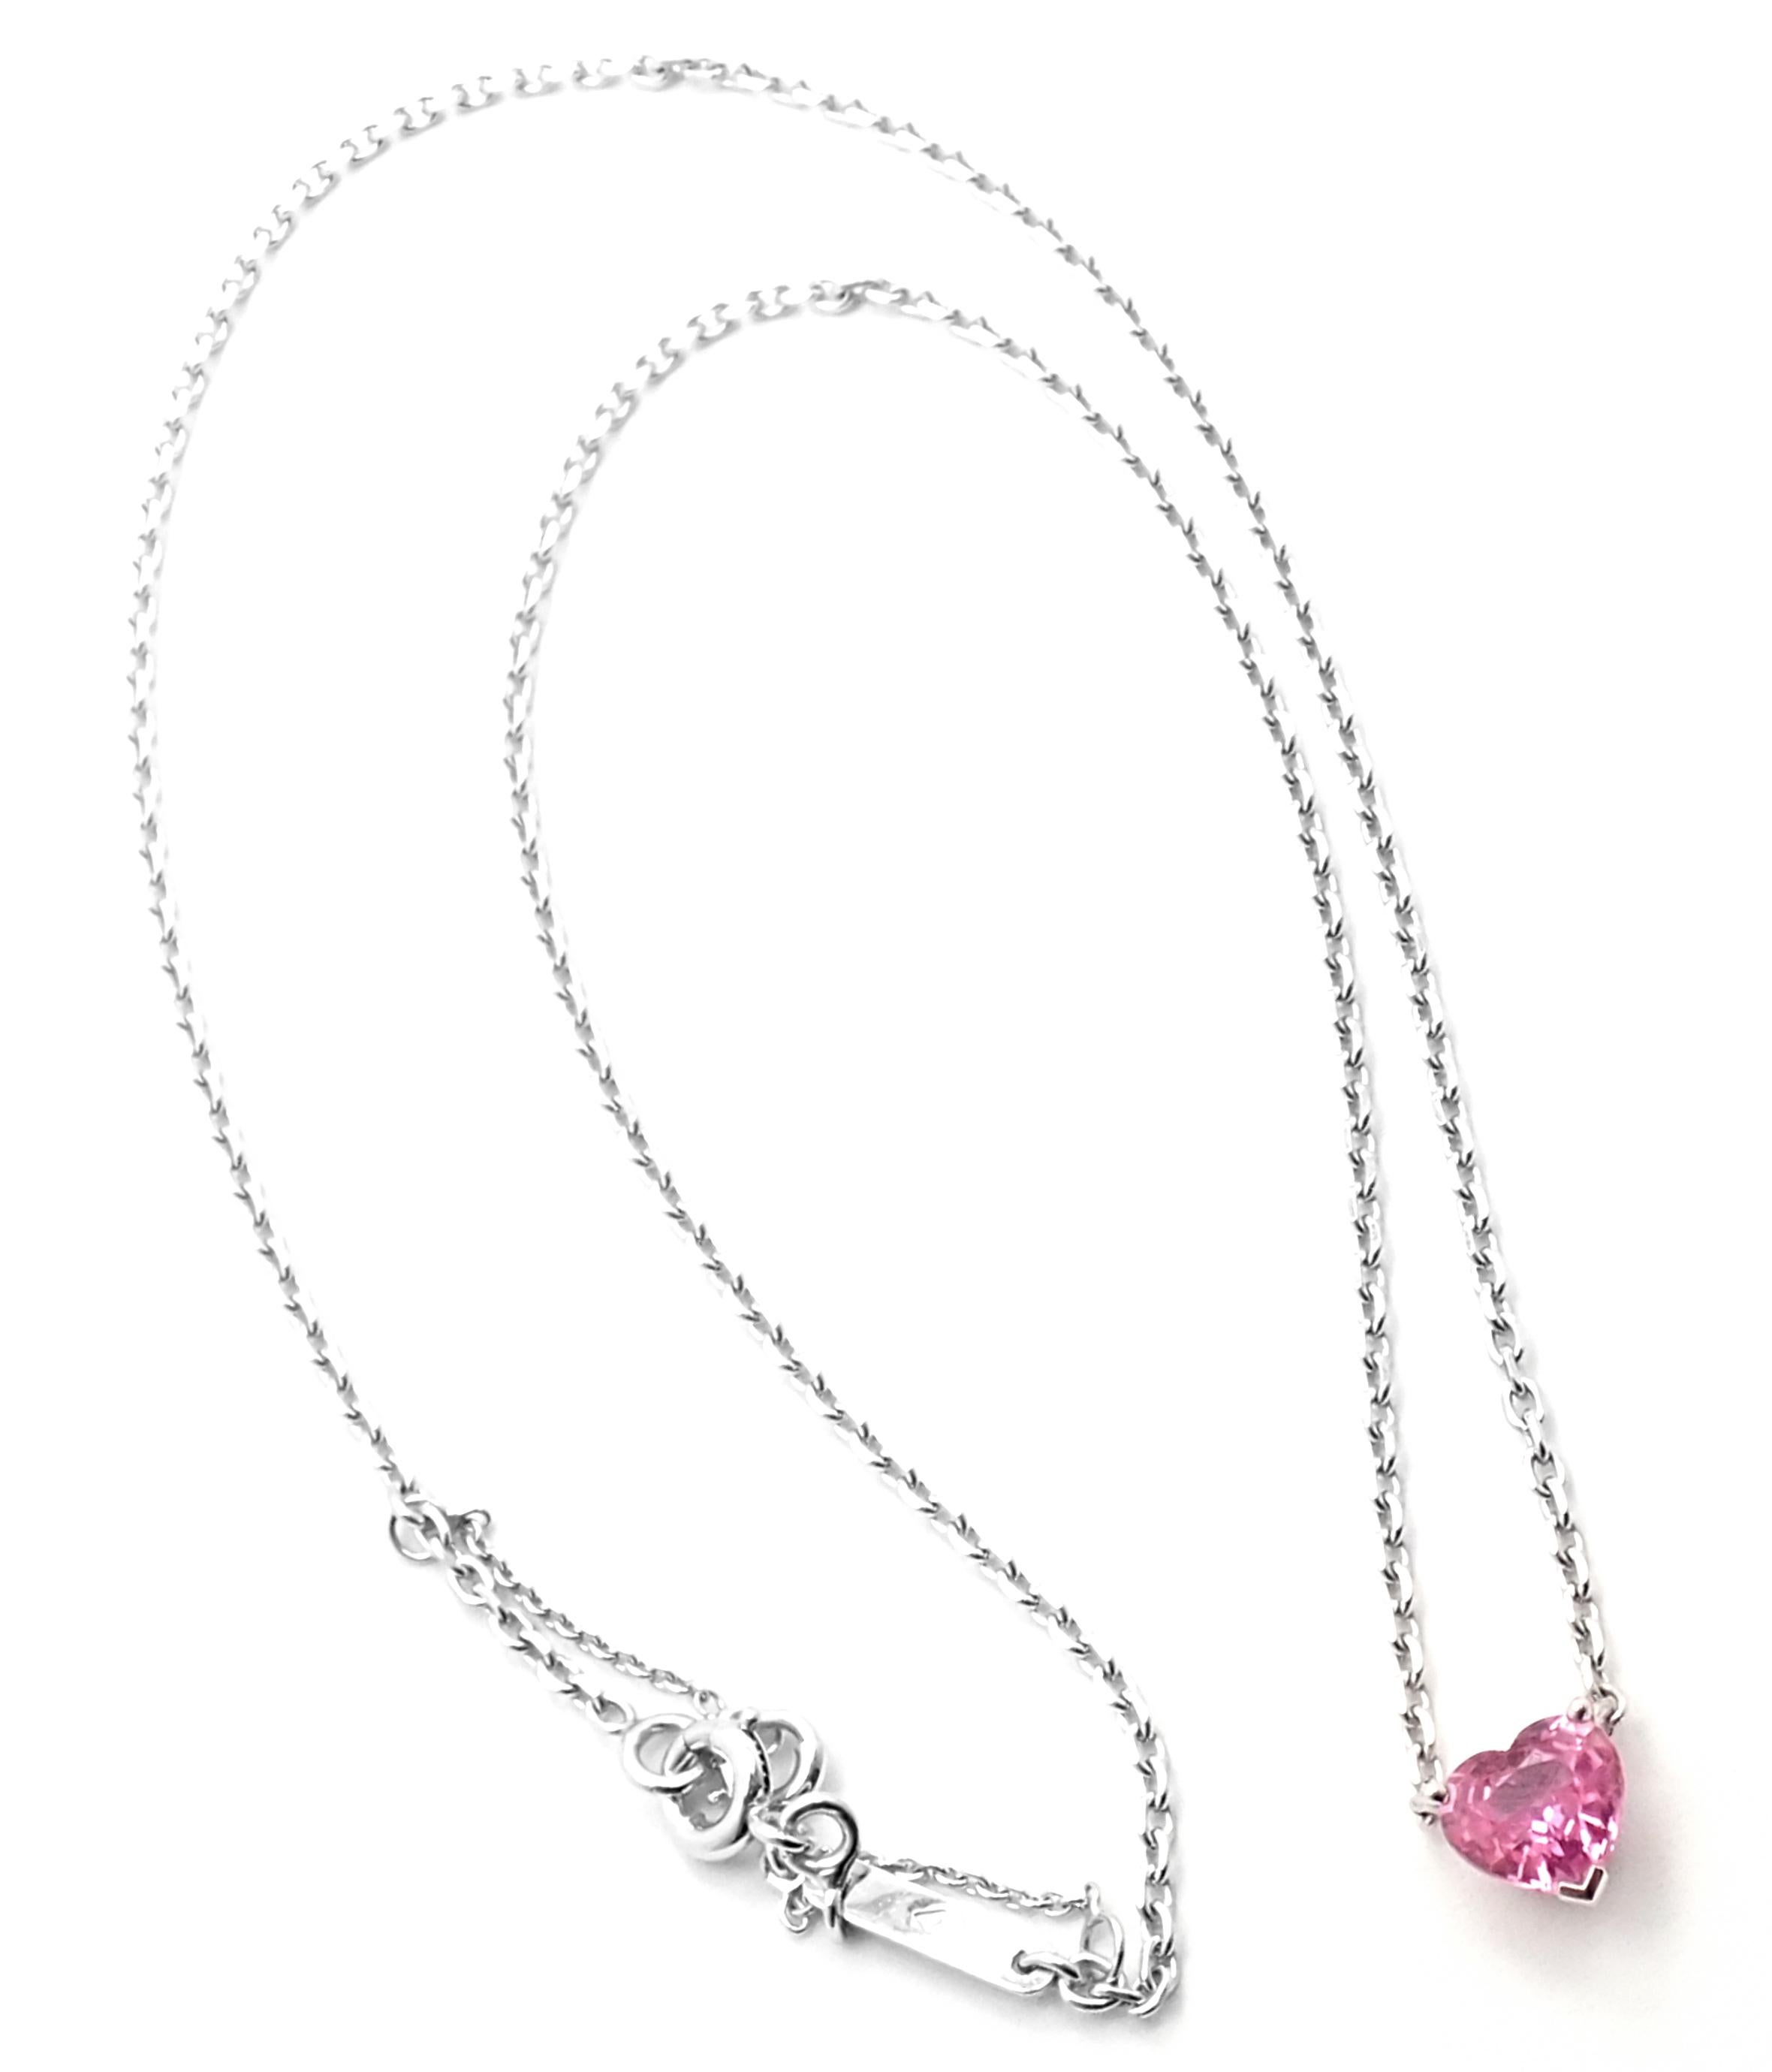 18k White Gold Heart Shaped Pink Sapphire Pendant Necklace by Cartier. 
With 1 heart shape pink sapphire 7mm x 7.5mm  
Details: 
Length: 15.5''  
Width: 2mm
Pendant: 7mm x 7.5mm
Weight: 4.8grams 
Stamped Hallmarks:  Cartier 750 AVXXXX(serial number